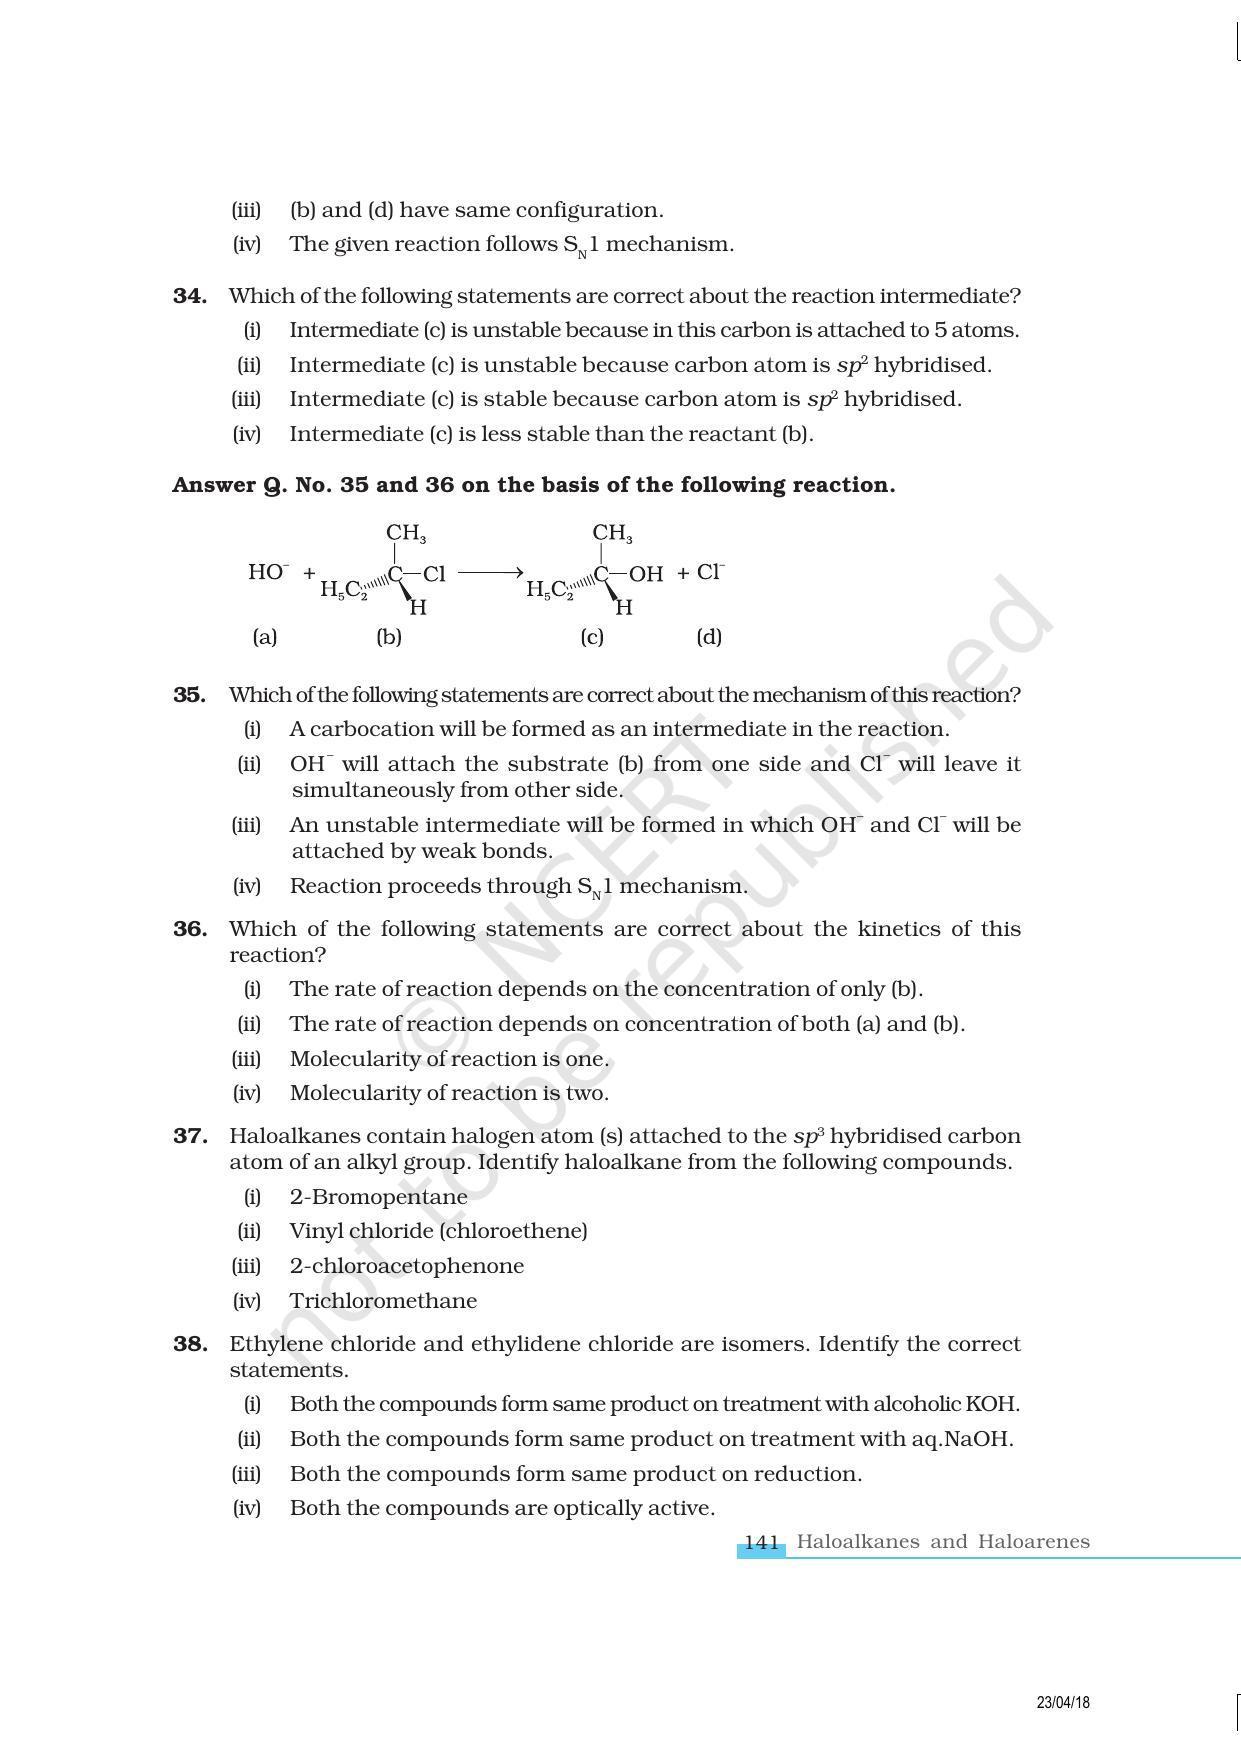 NCERT Exemplar Book for Class 12 Chemistry: Chapter 10 Haloalkanes and Haloarenes - Page 9